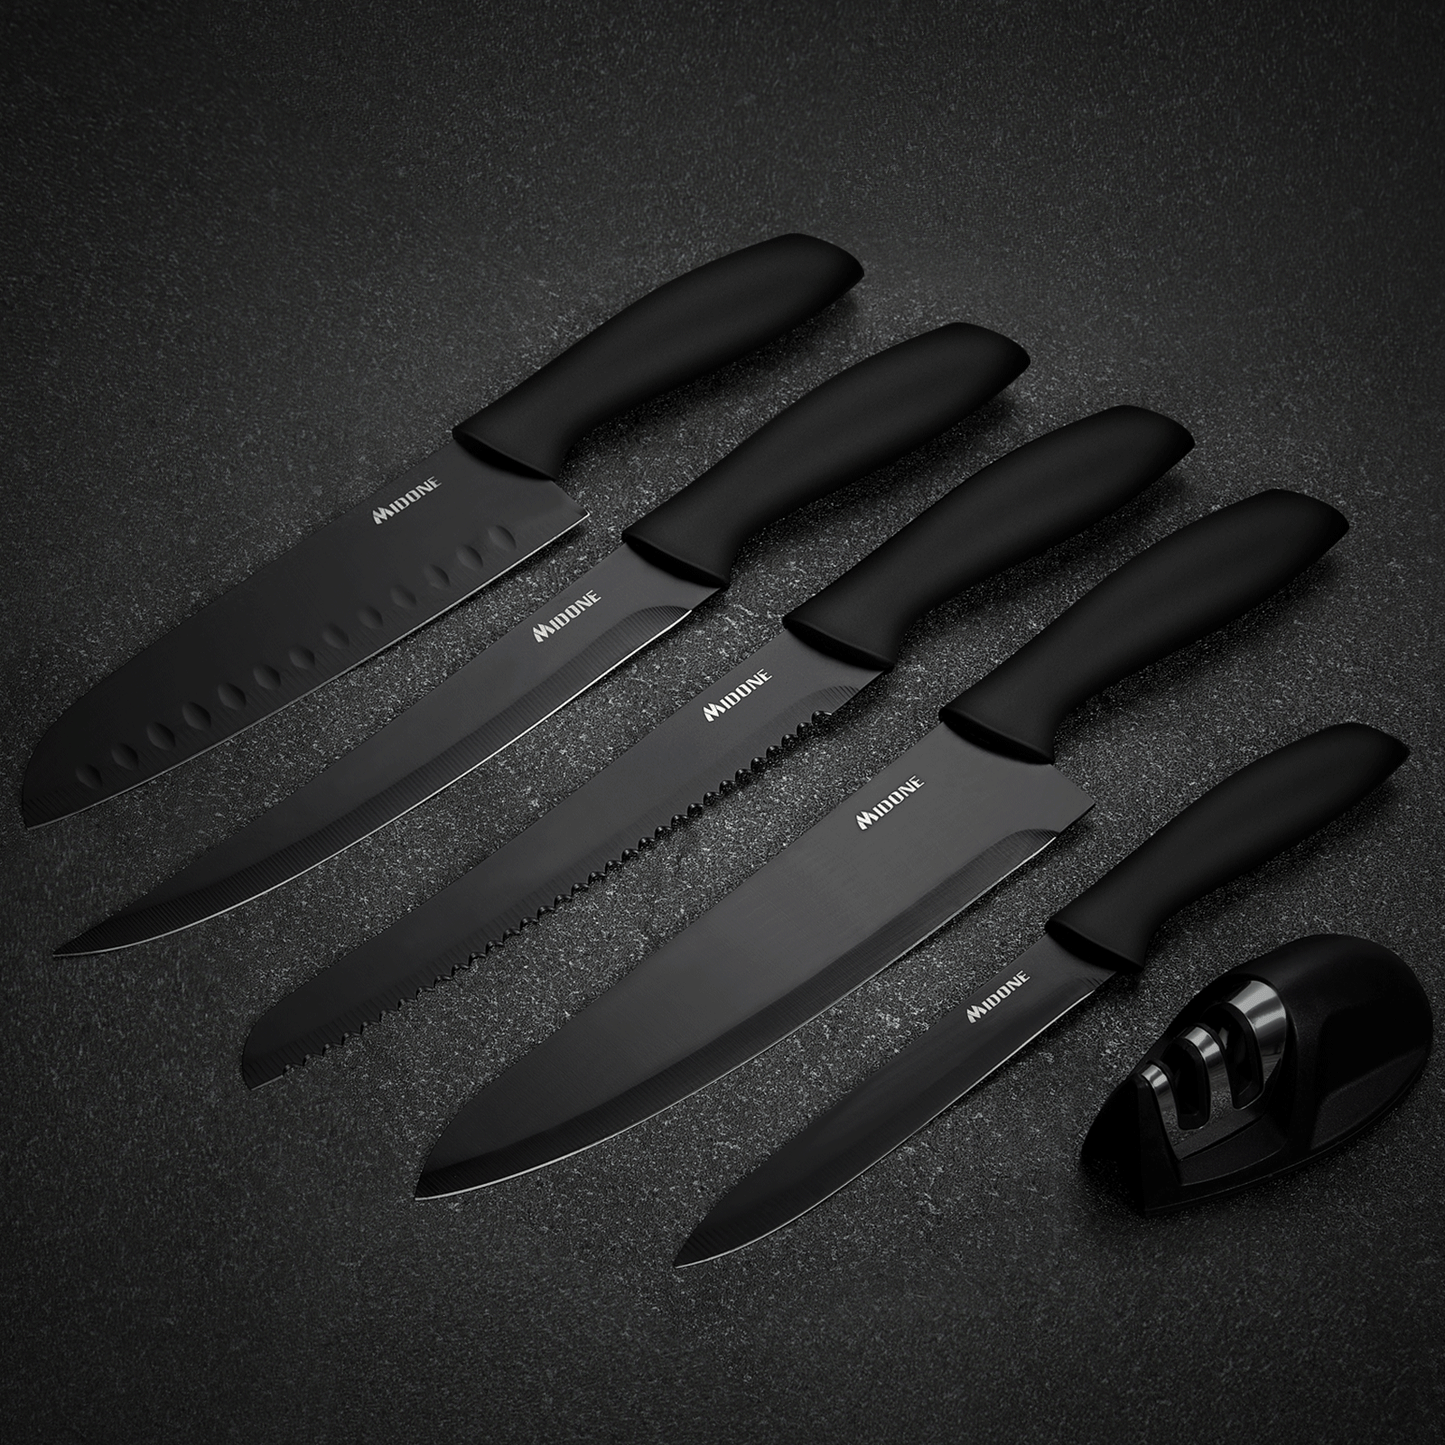 MIDONE Knife Set, 7 pcs German High Carbon Stainless Steel Kitchen Knife Set, with Sharpener & Acrylic Stand, Black